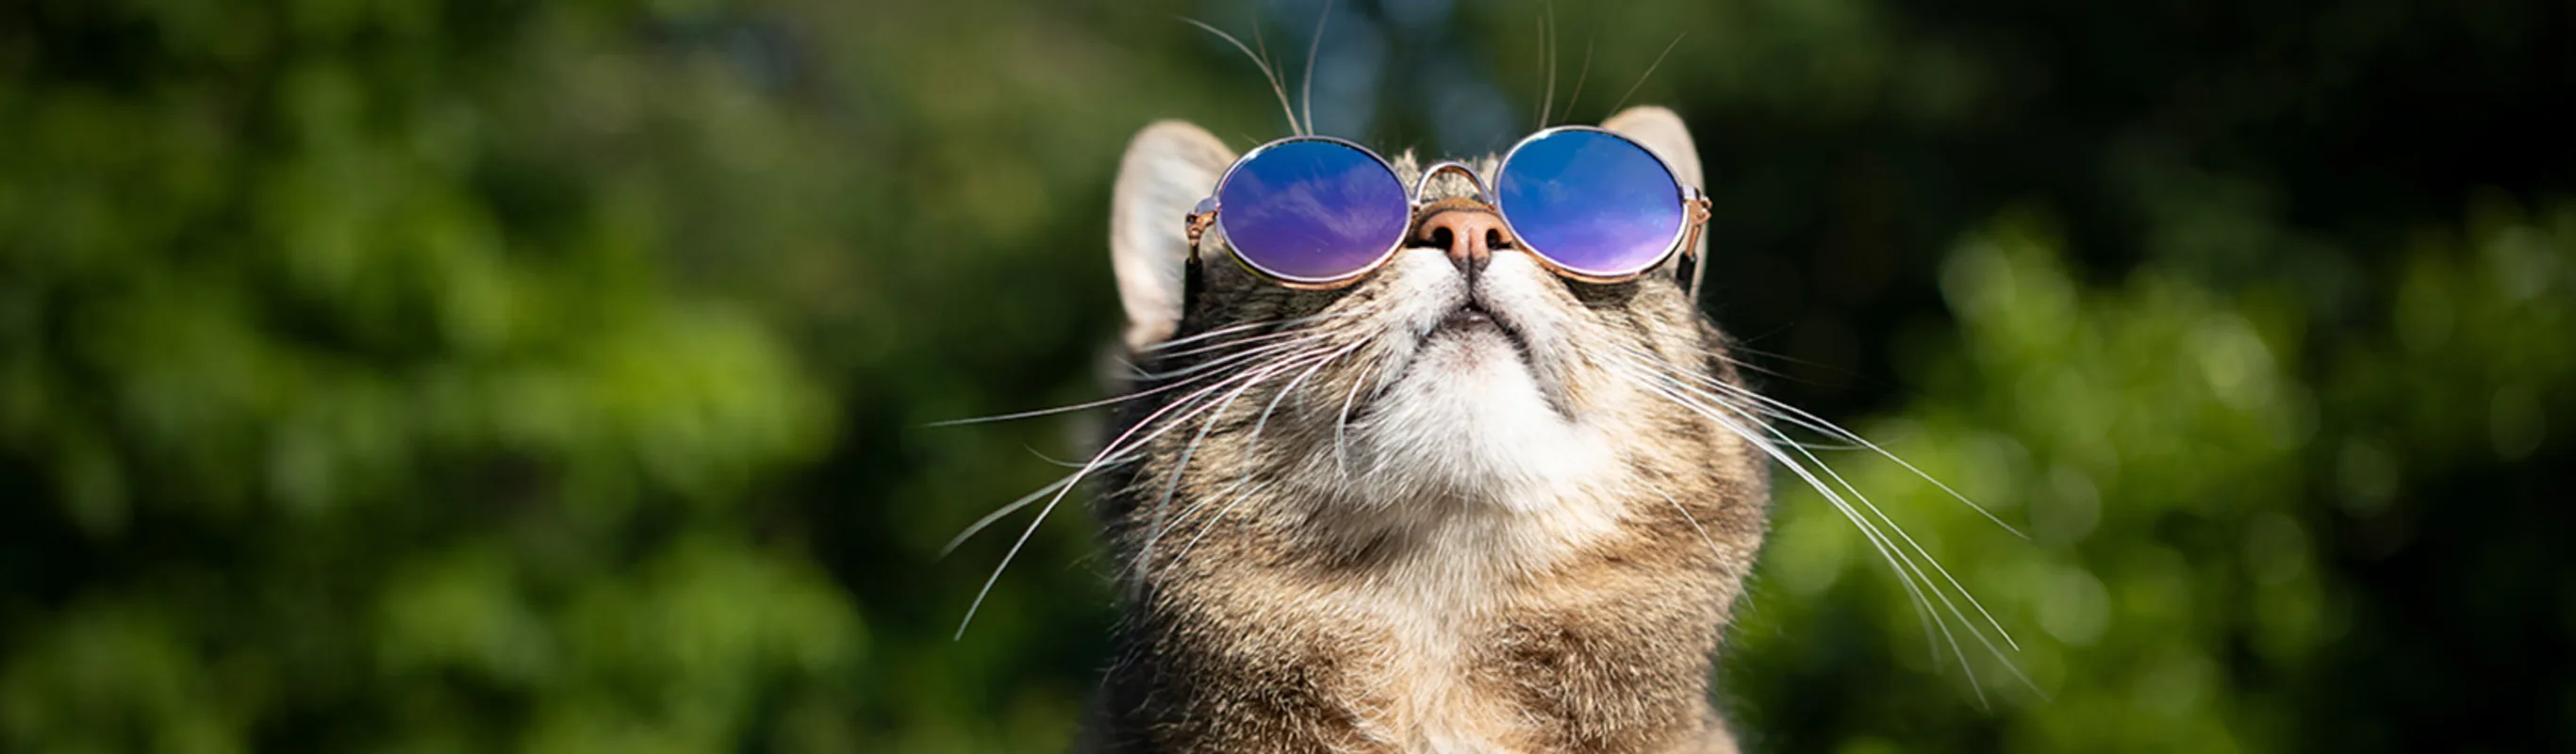 Cat looking up with sunglasses outdoors